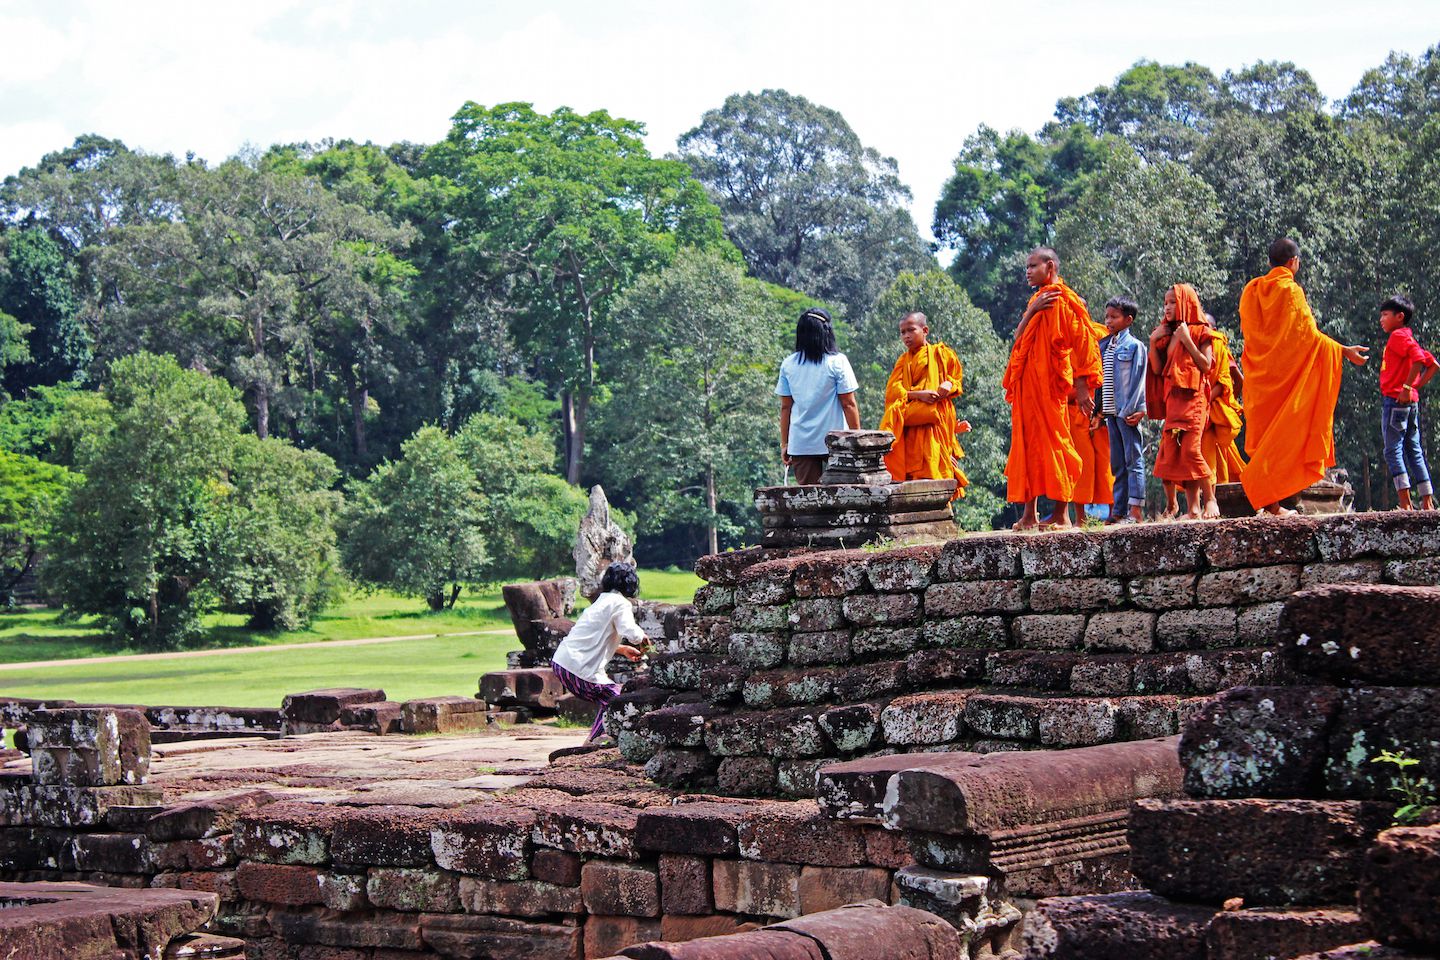 Monks at the Elephant Terrace